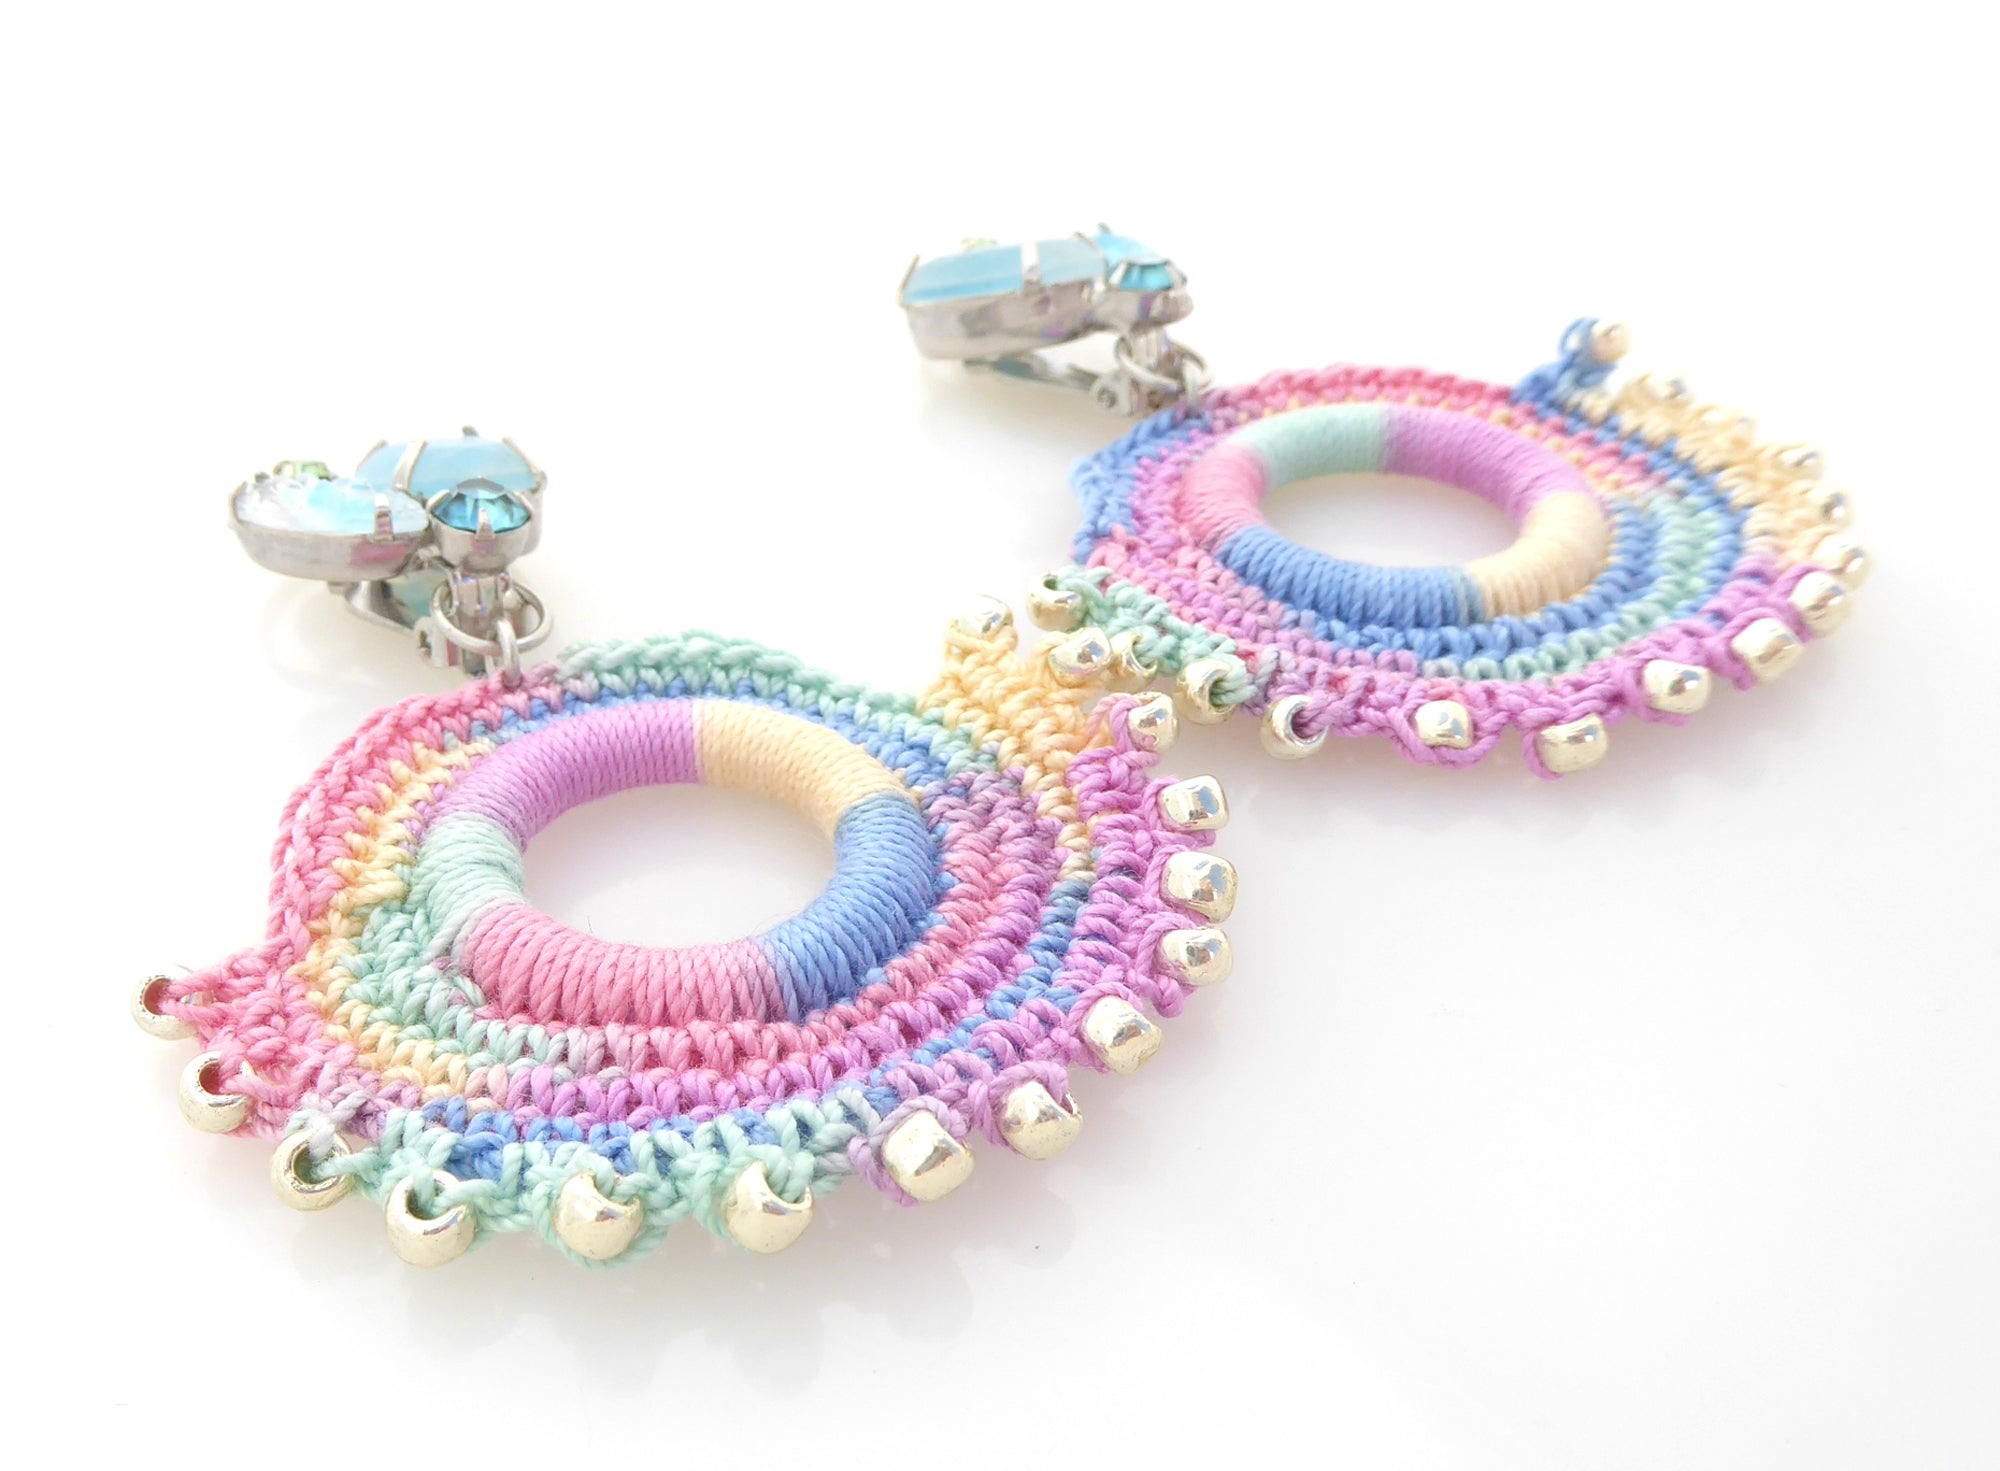 1950s light blue rhinestone and pastel crochet earrings by Jenny Dayco 2